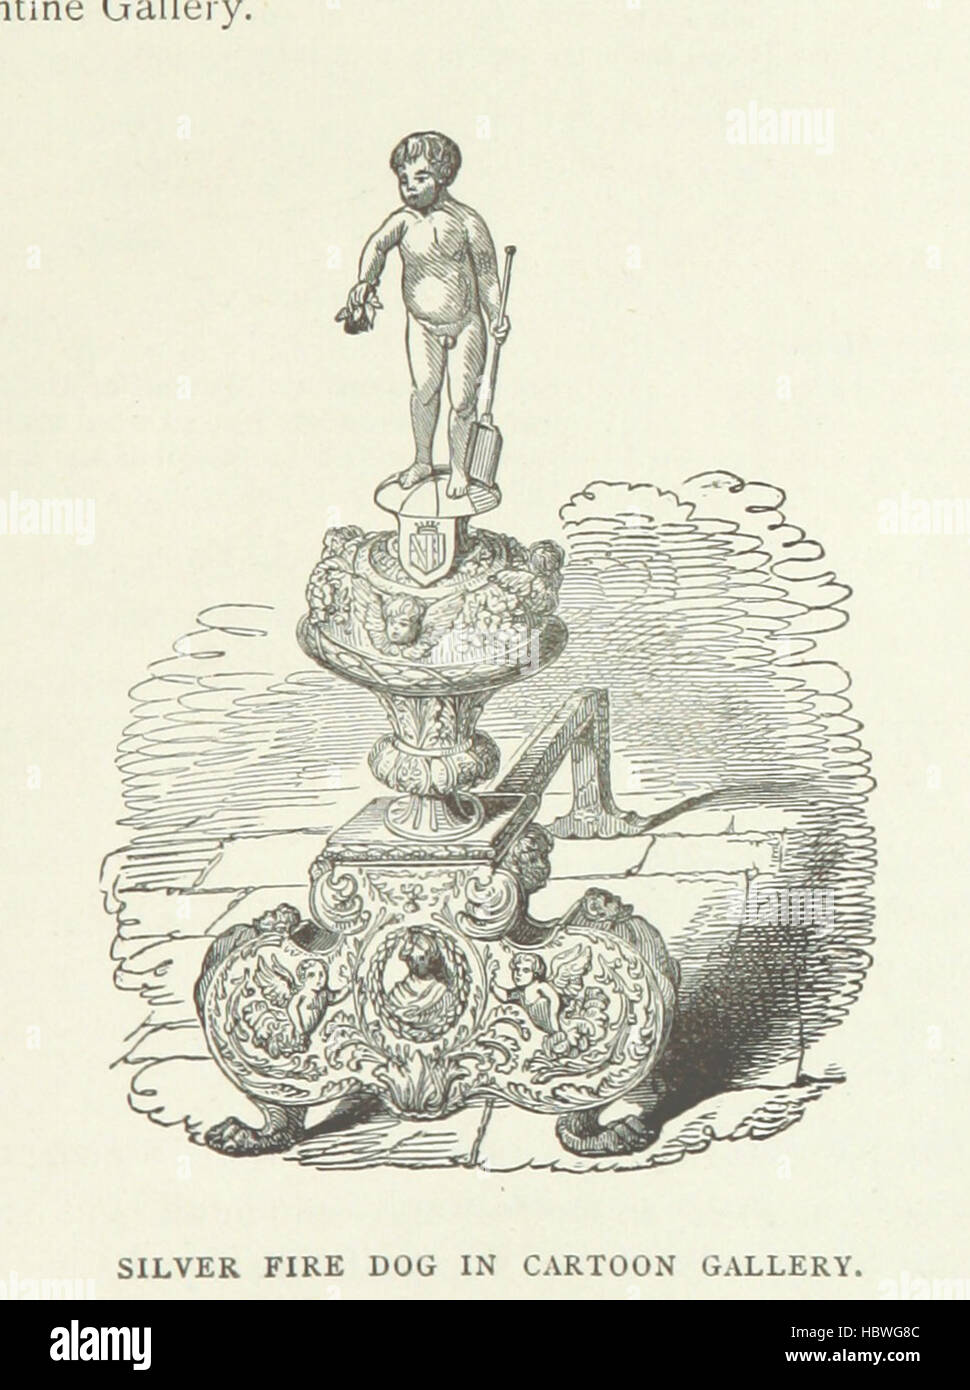 Image taken from page 63 of 'Guide to Knole House ... New authorized edition' Image taken from page 63 of 'Guide to Knole House Stock Photo